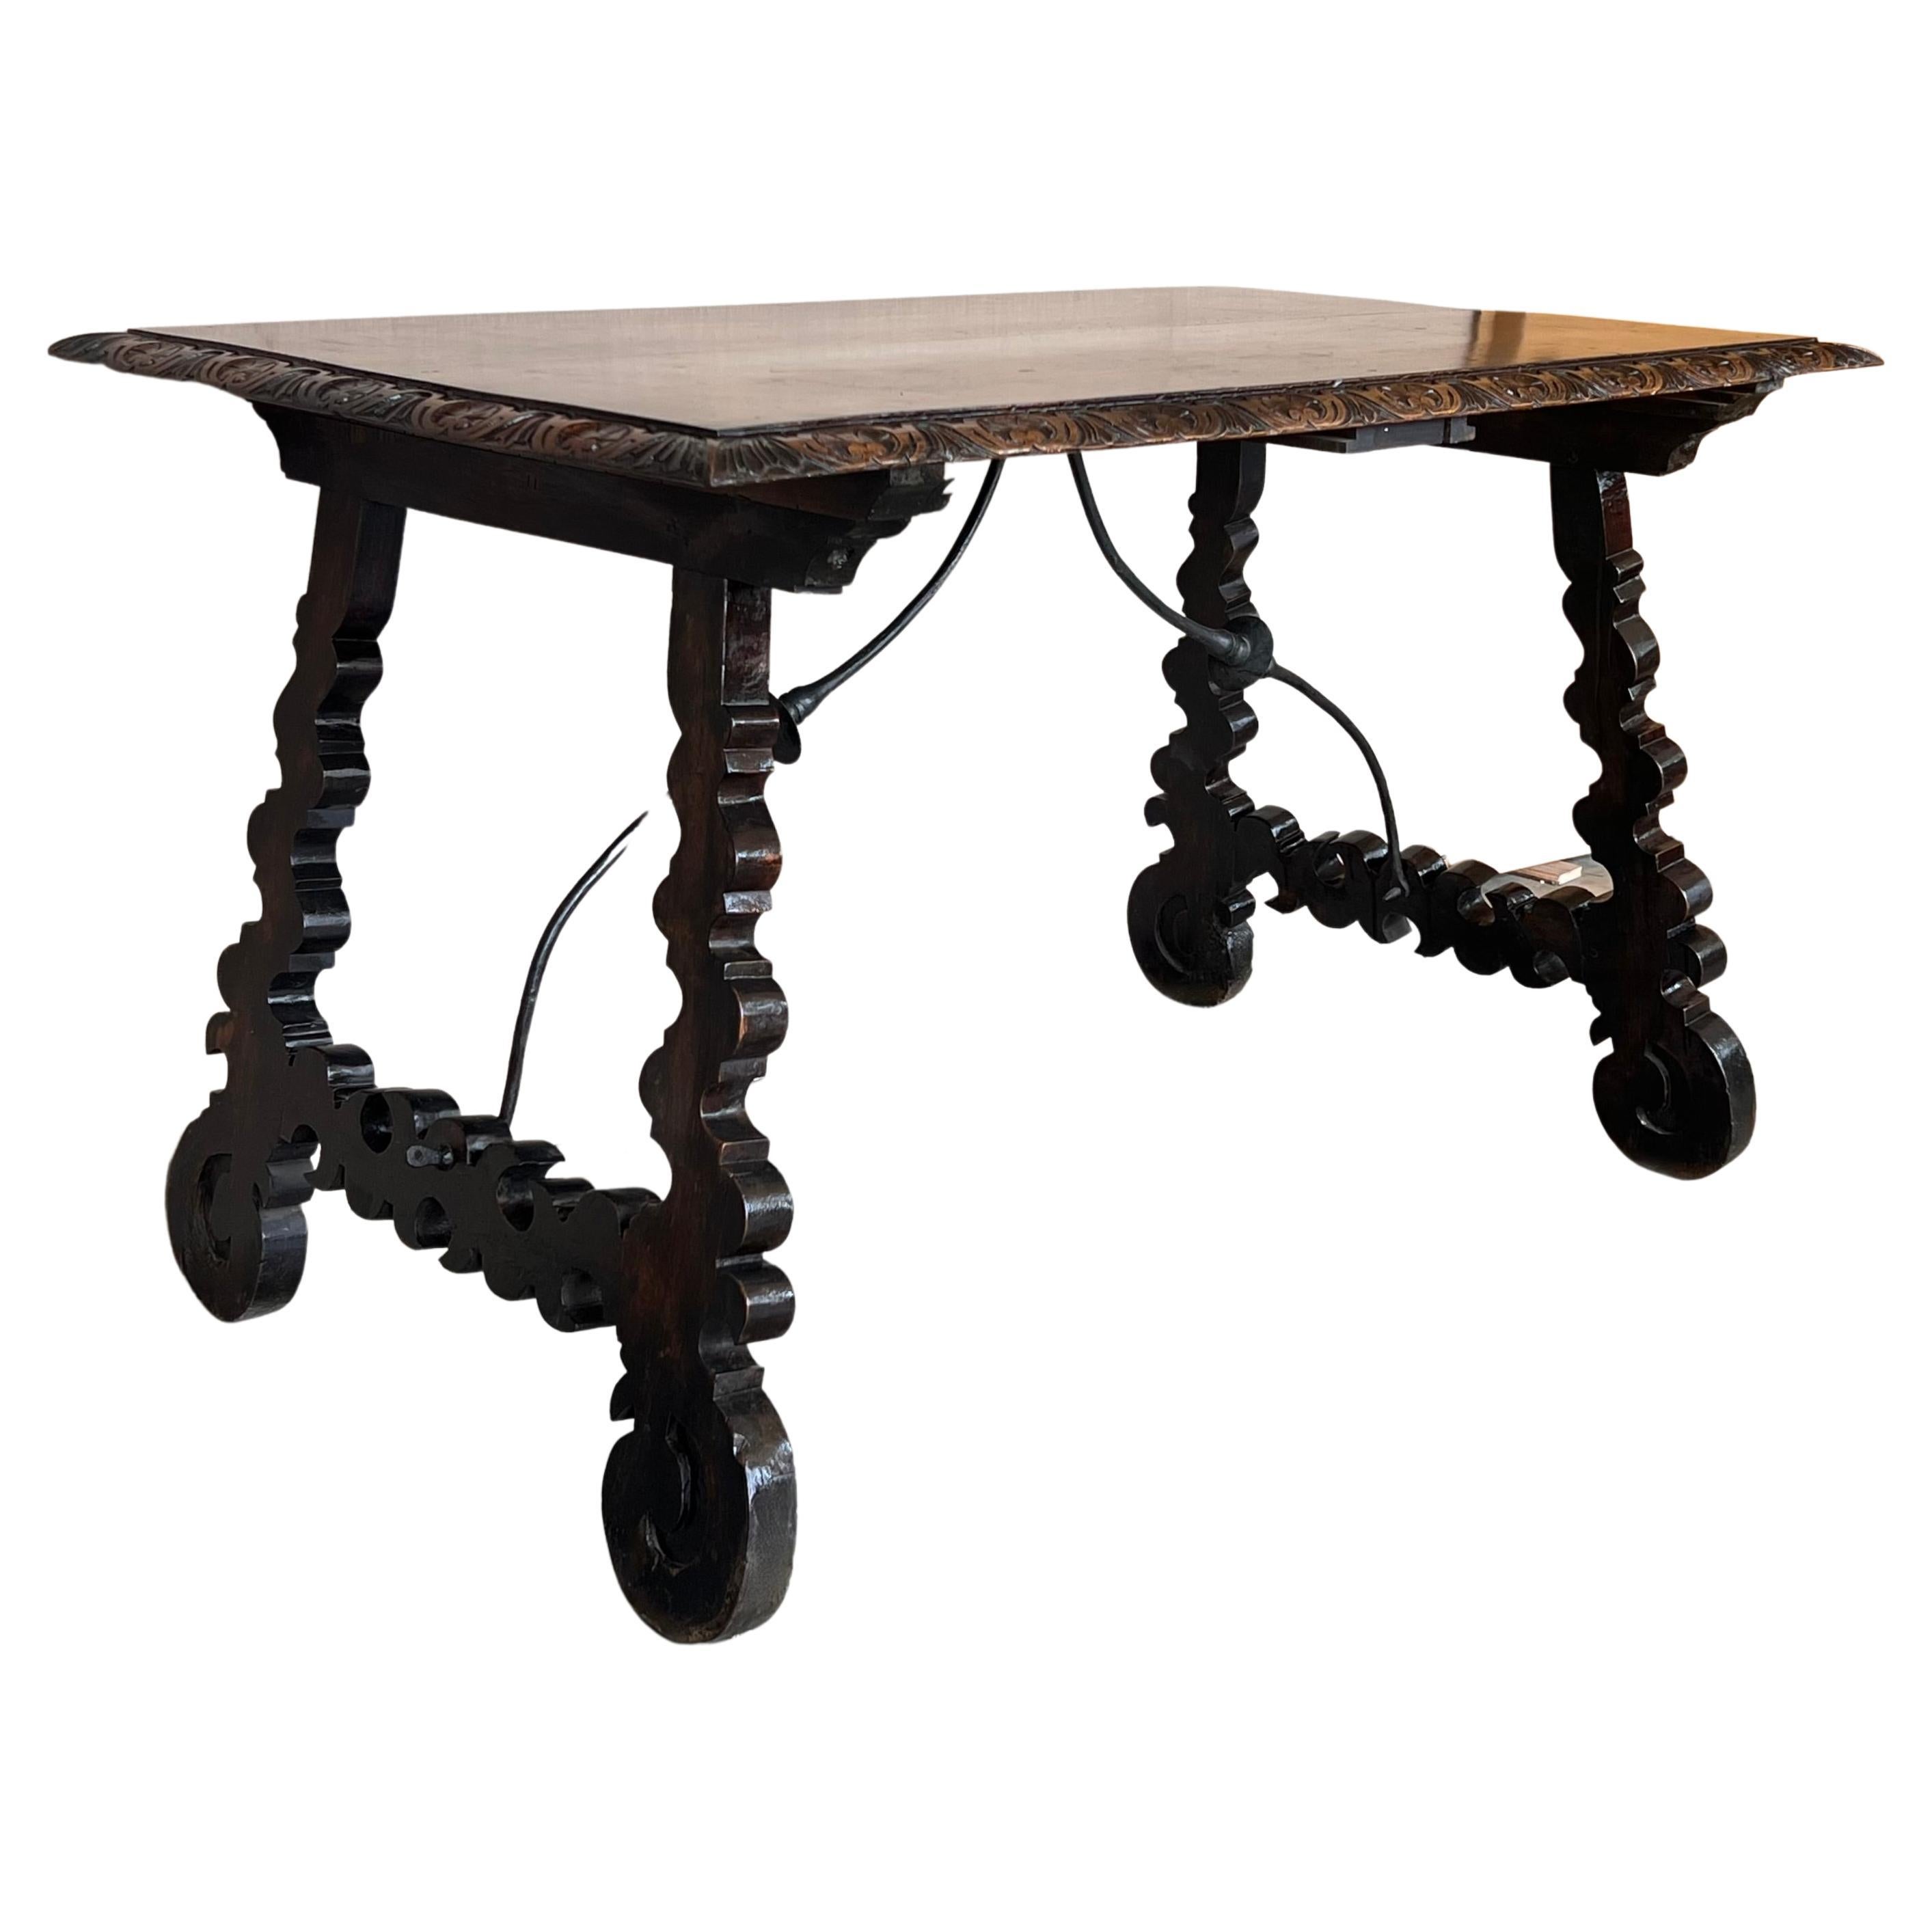 Side table of walnut with carved lyre legs .
The top is finely carved edges. 
Beautiful and original iron stretcher, Spanish, 19th century.